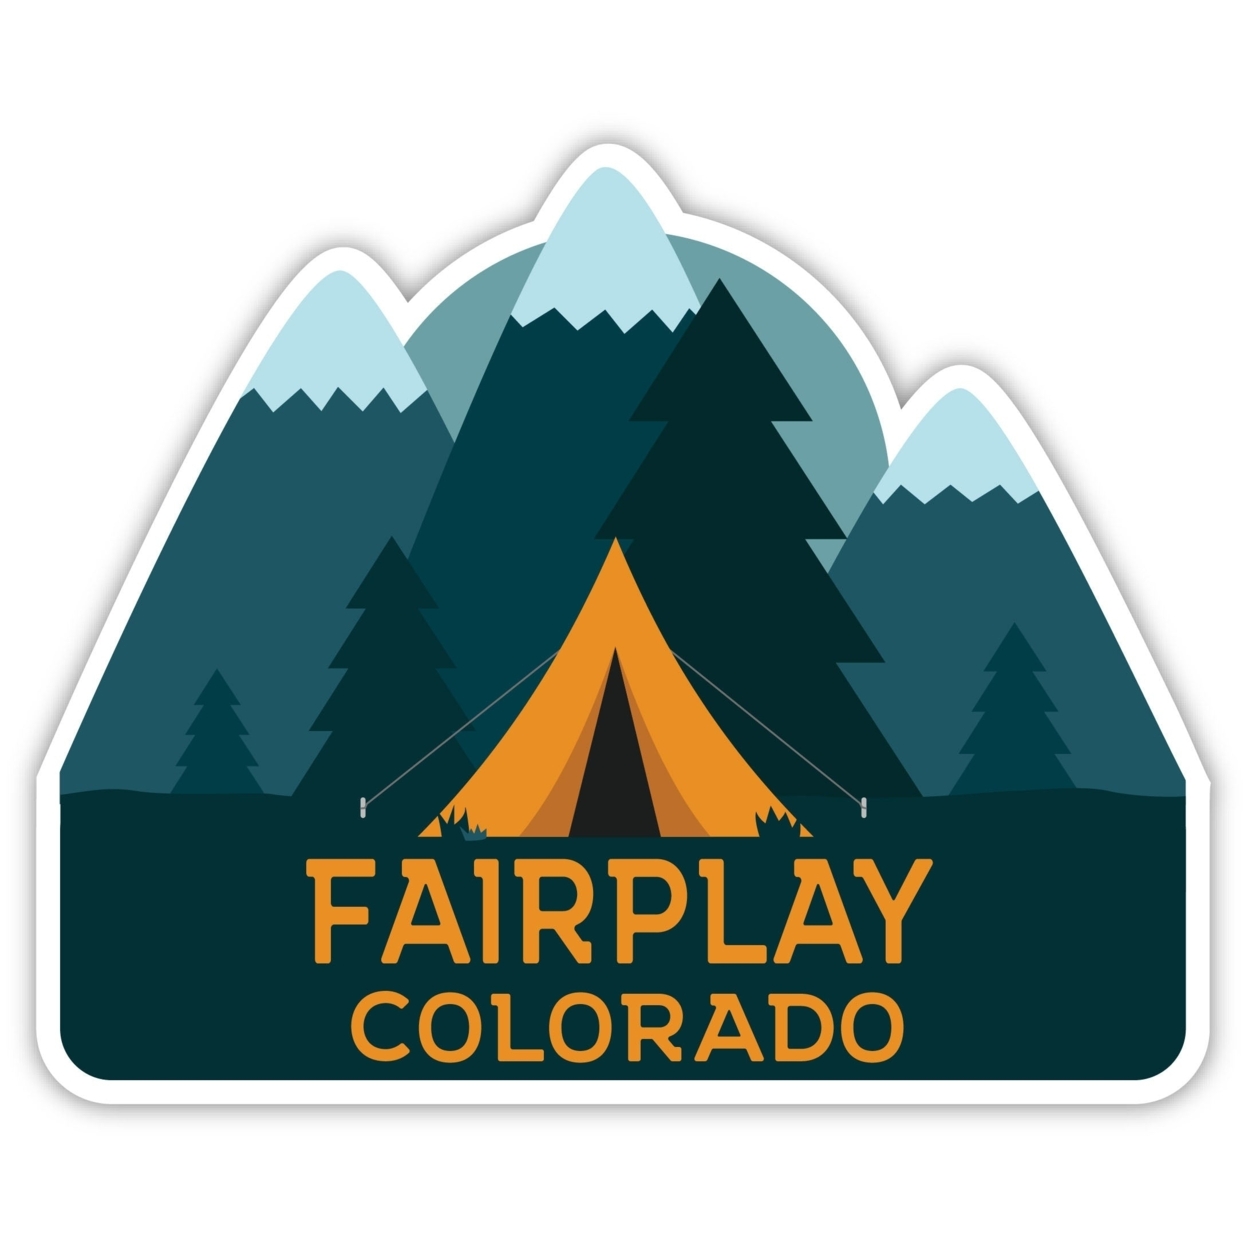 Fairplay Colorado Souvenir Decorative Stickers (Choose Theme And Size) - 4-Pack, 8-Inch, Camp Life